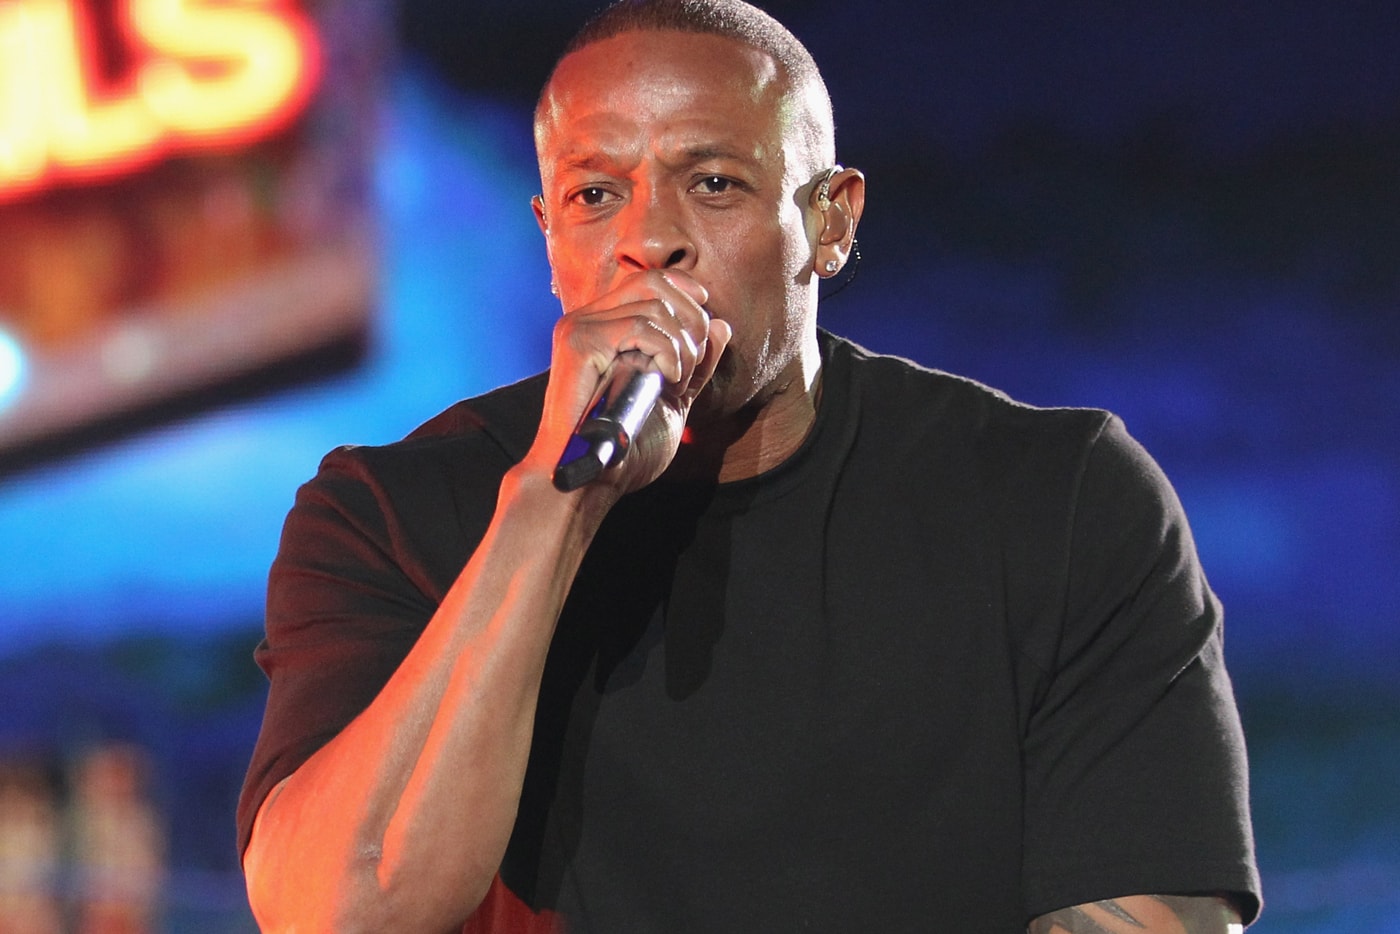 dr-dre-confirms-new-single-under-pressure-featuring-jay-z